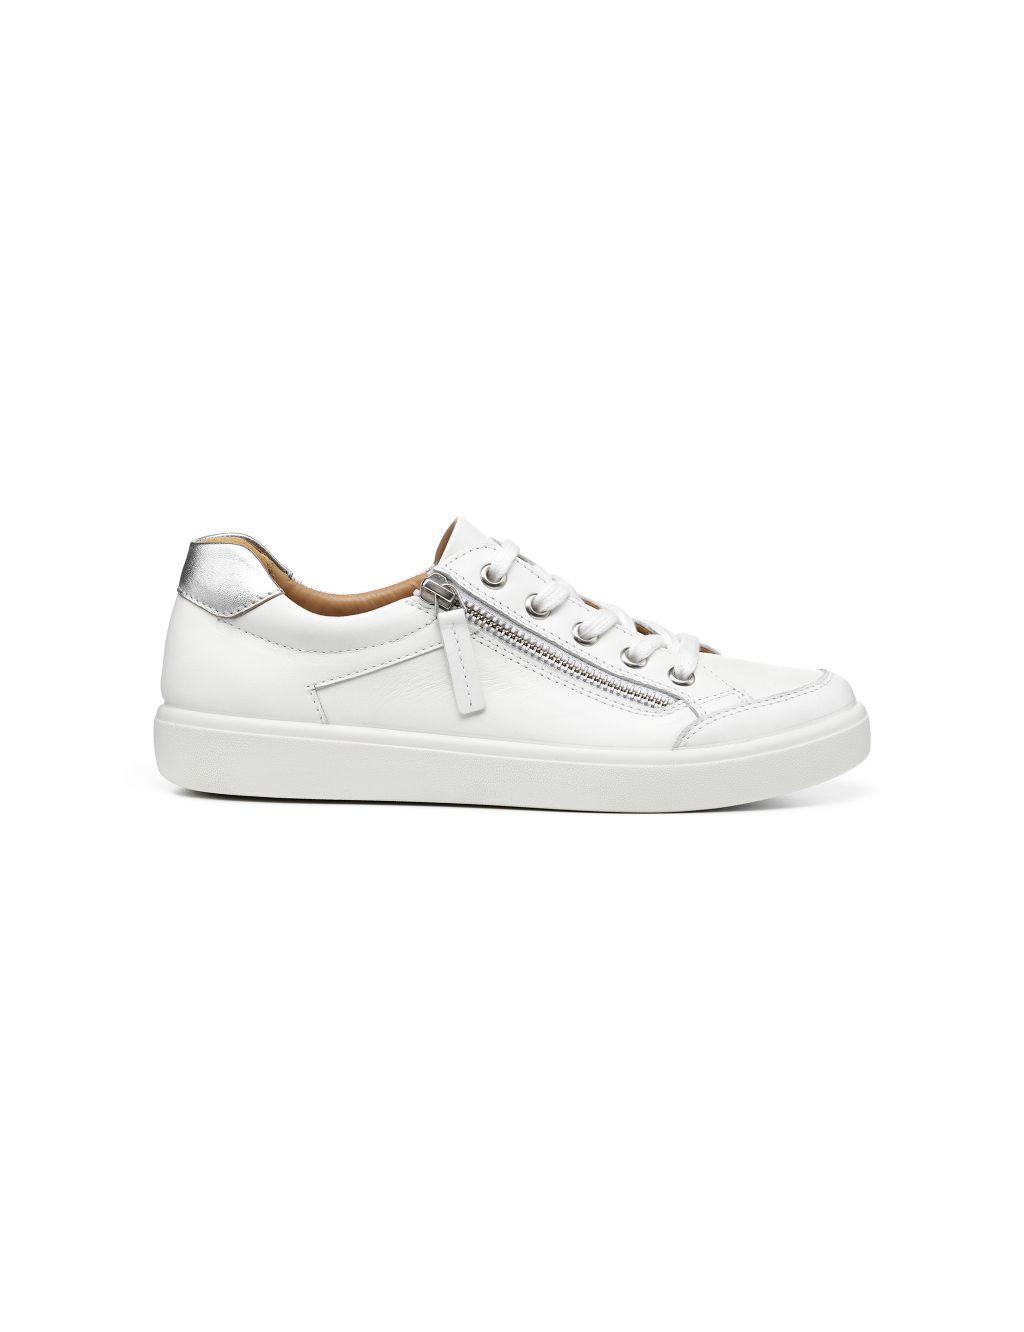 Chase II Wide Fit Leather Metallic Trainers image 1